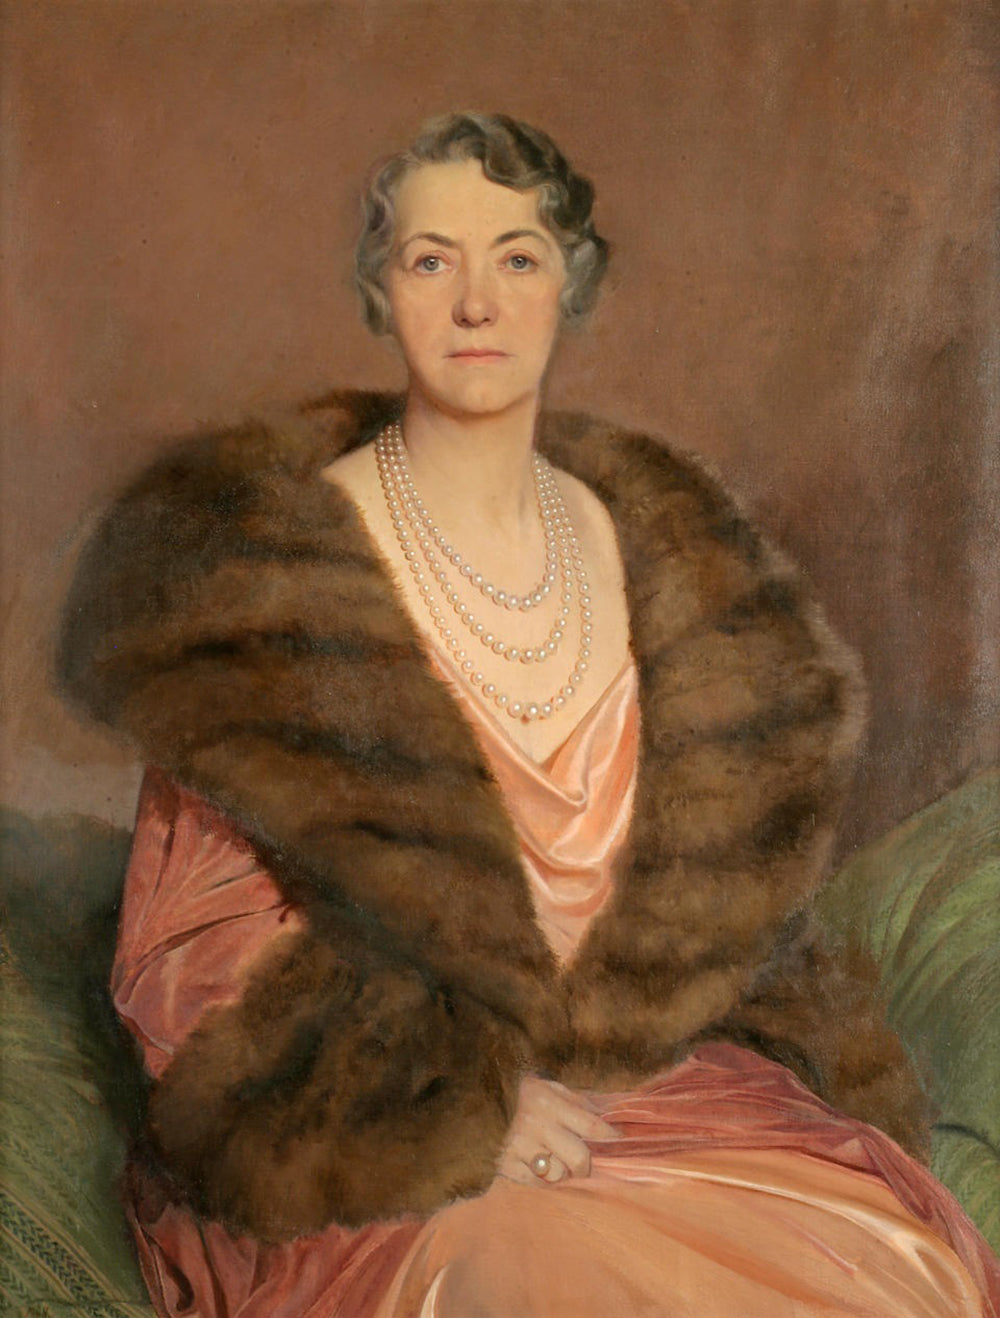 Top Ten Most Expensive Pearls Ever Sold: Mrs. Anna Dodge Portrait Dodge Pearl Necklace